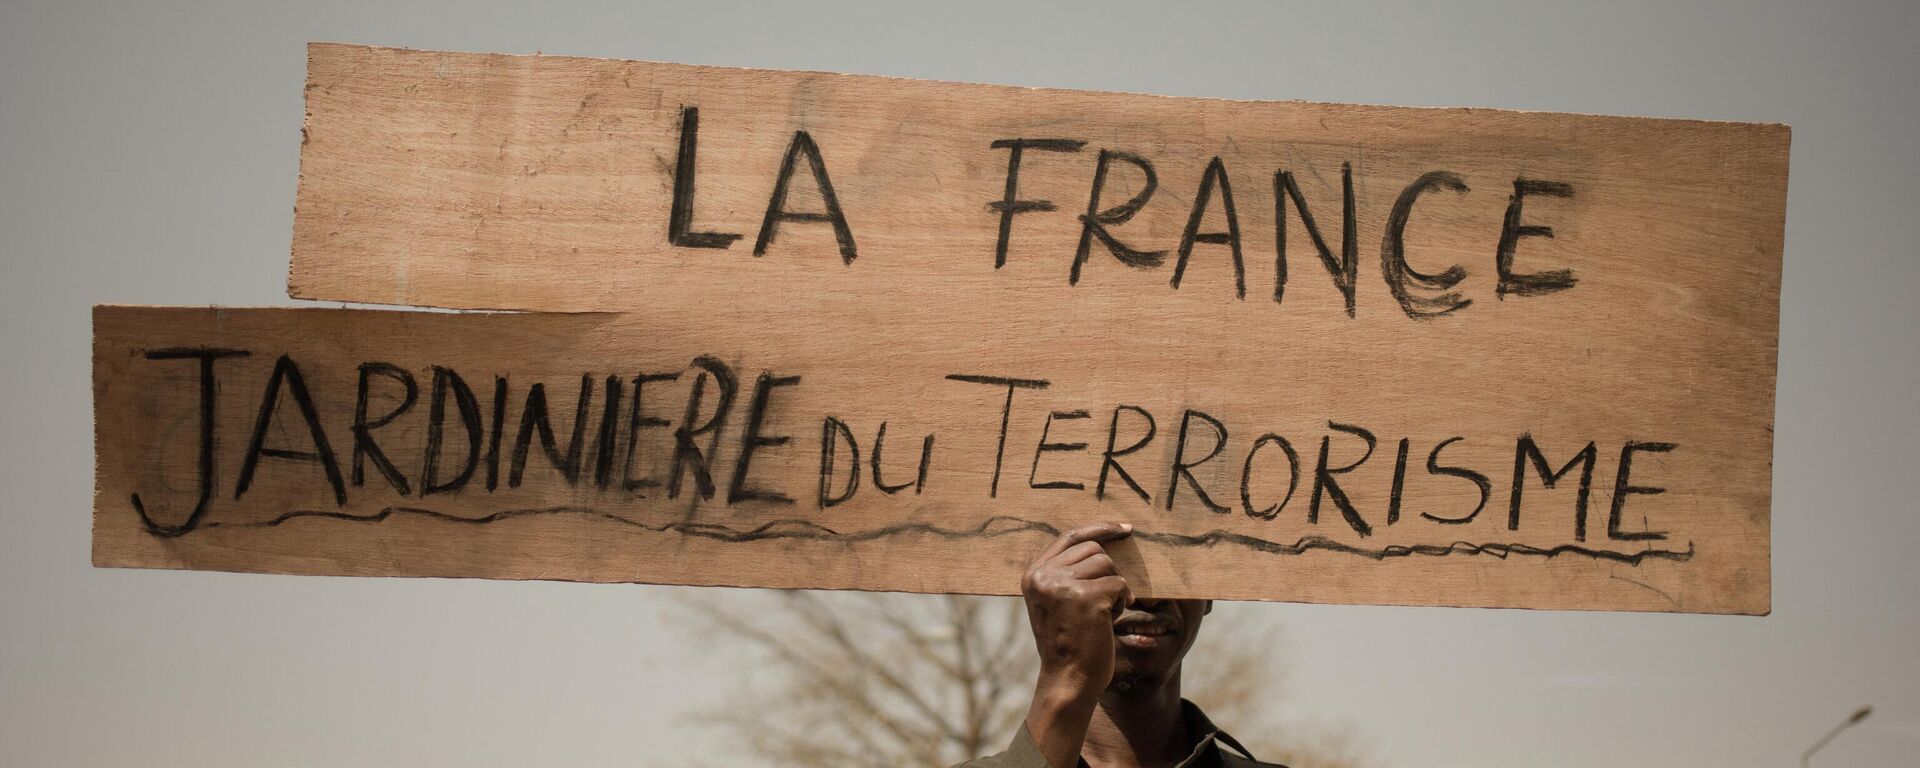 A protester holds a placard reading France, gardener of terrorism  during a demonstration organised by the pan-Africanst platform Yerewolo to celebrate France's announcement to withdraw French troops from Mali, in Bamako, on February 19, 2022 - Sputnik International, 1920, 05.05.2022